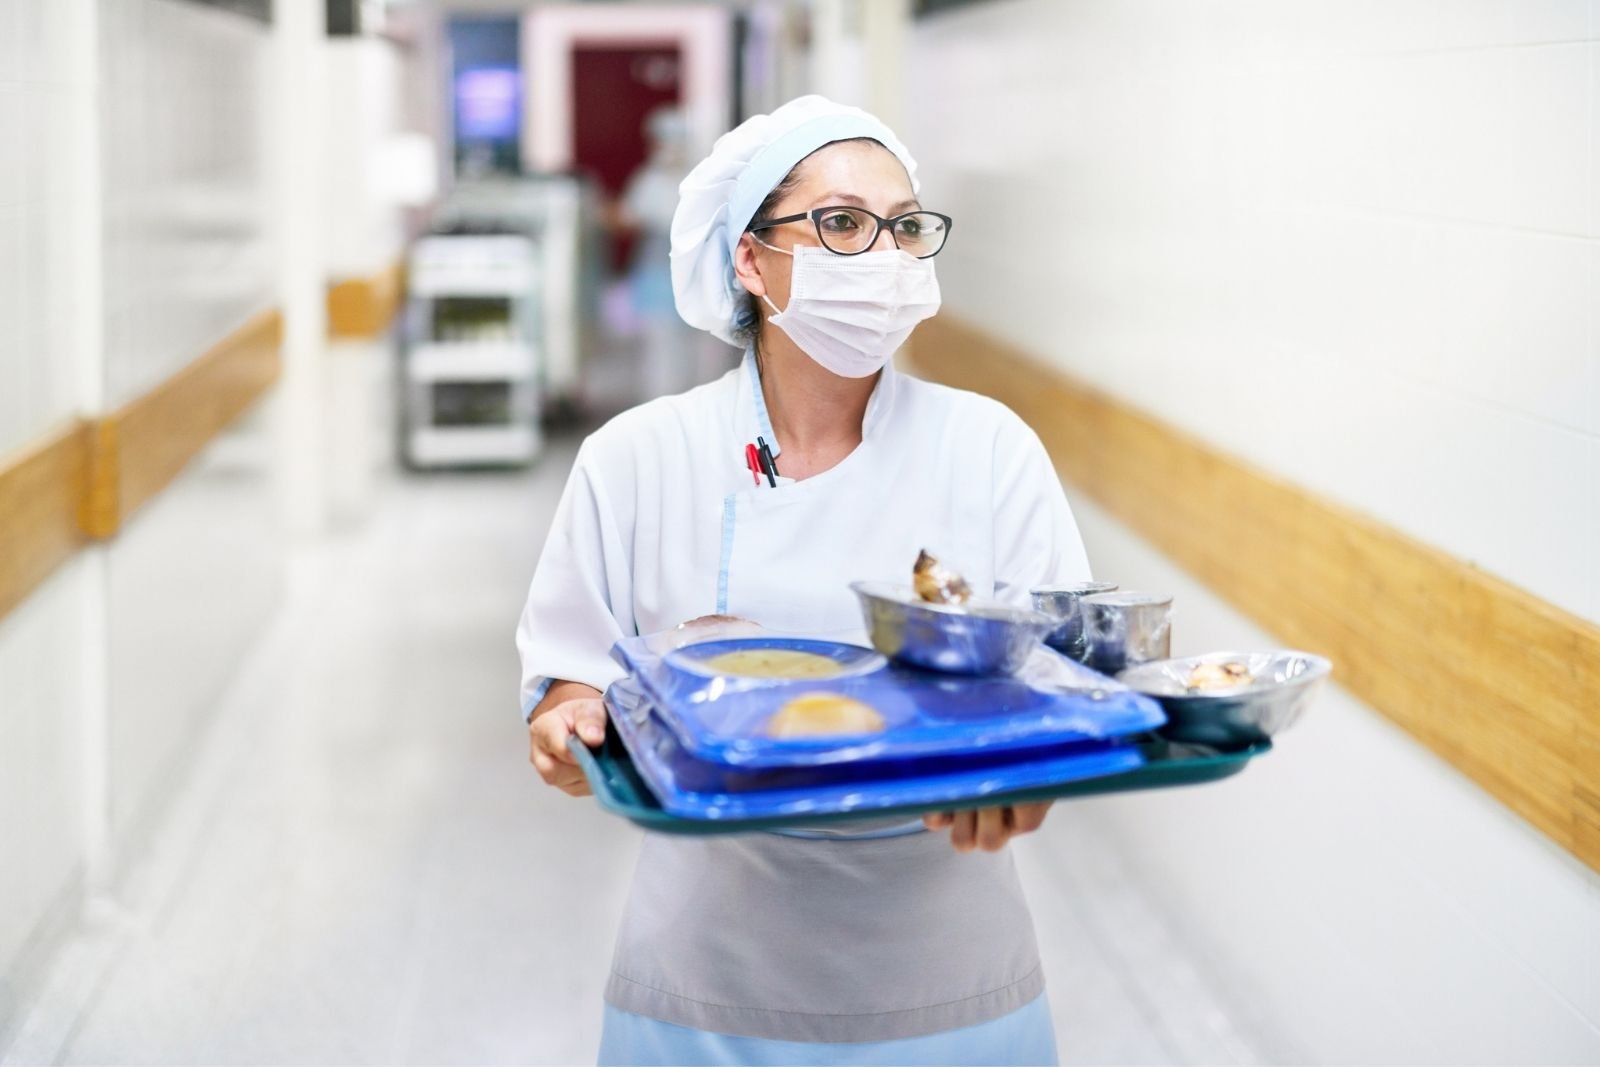 Food handler in healthcare carrying a tray of food